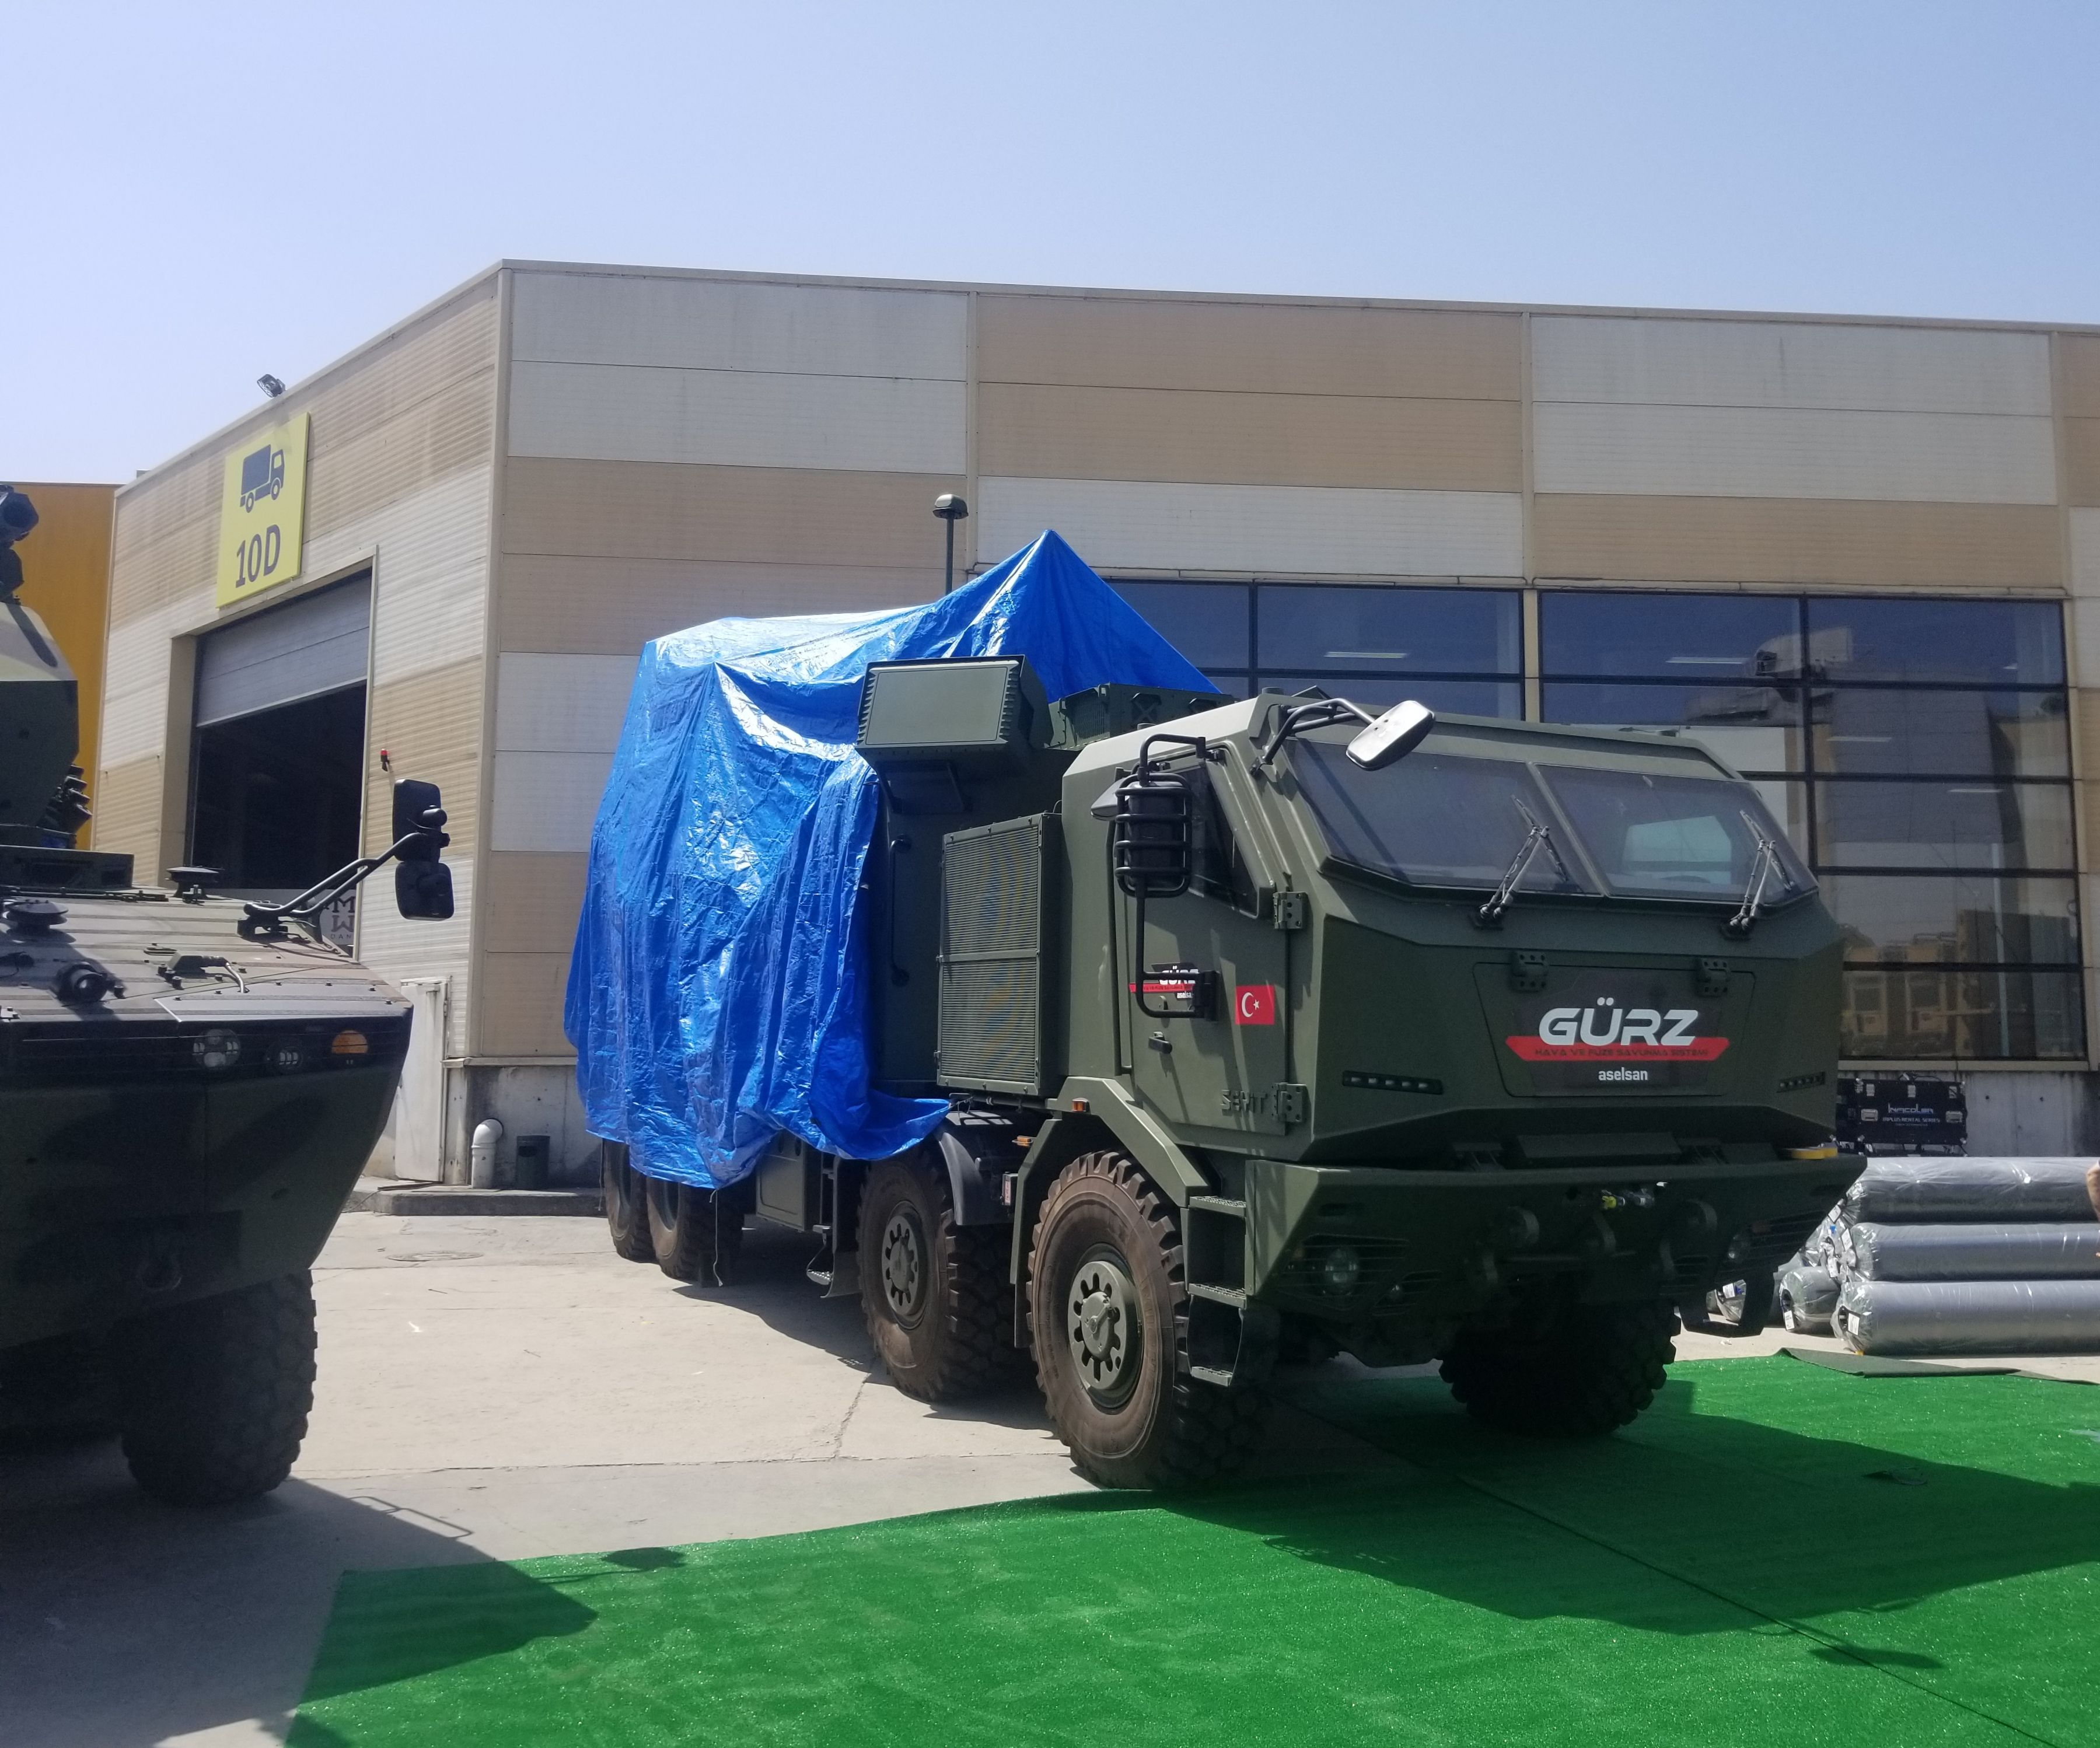 ASELSAN introduces GÜRZ Air and Missile Defence System at IDEF